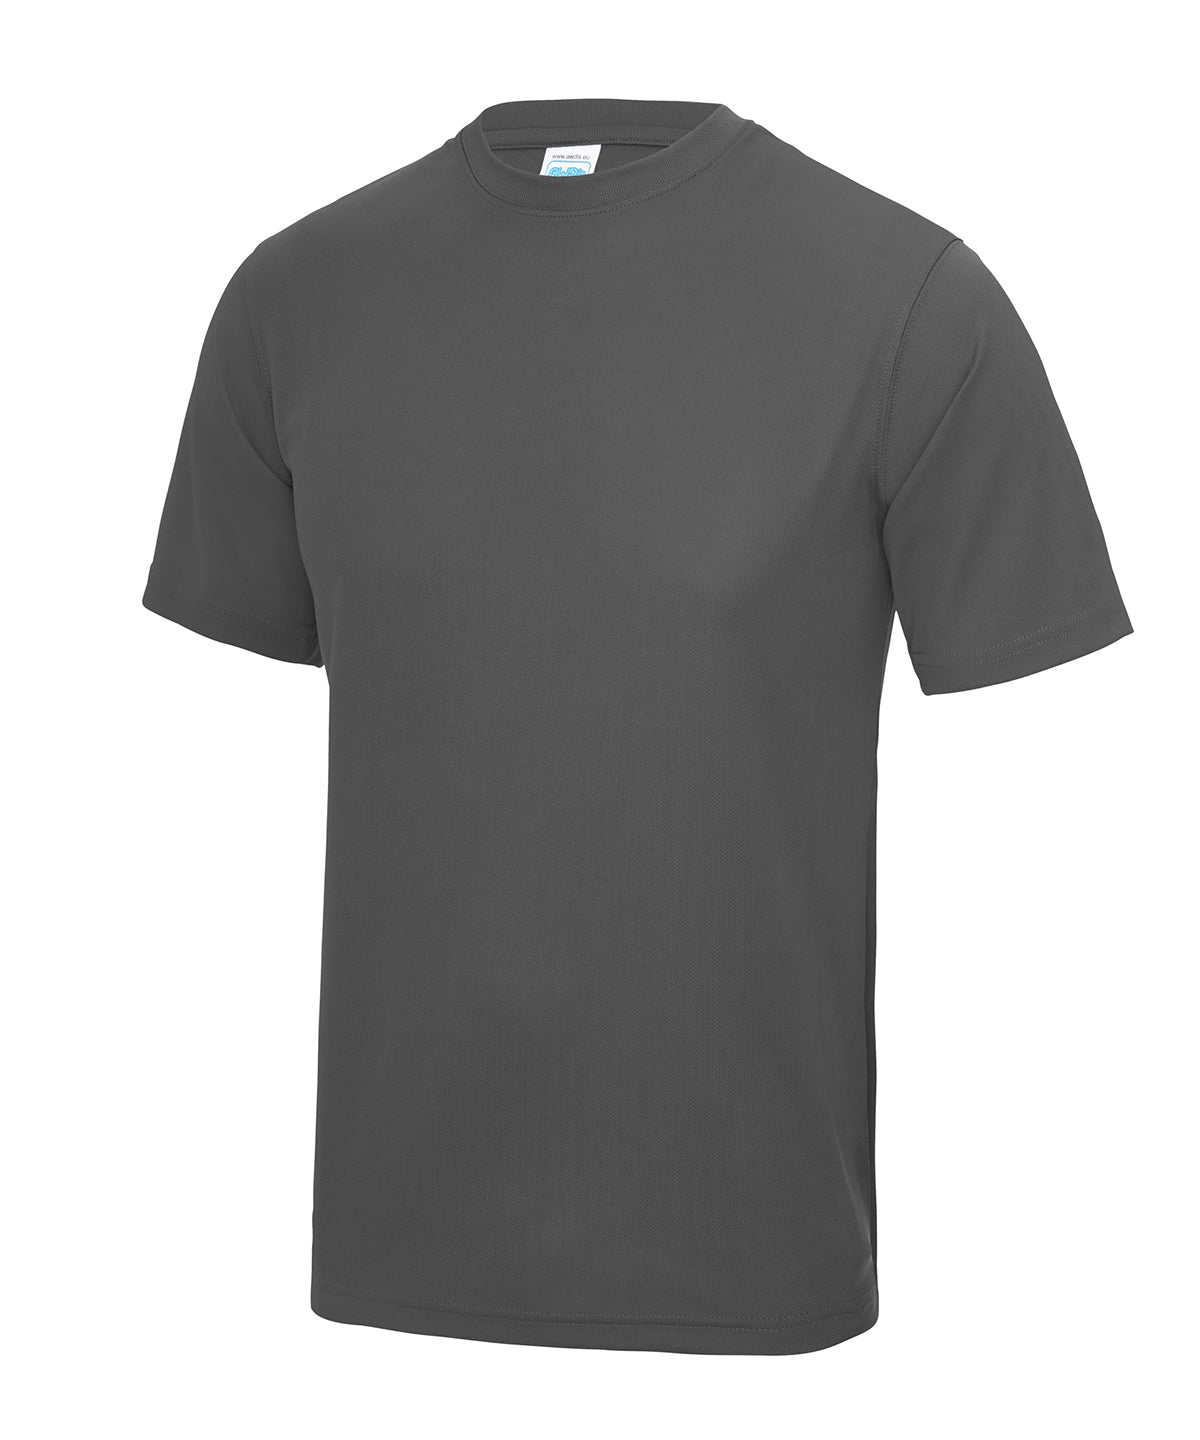 Personalised T-Shirts - Light Grey AWDis Just Cool Cool T